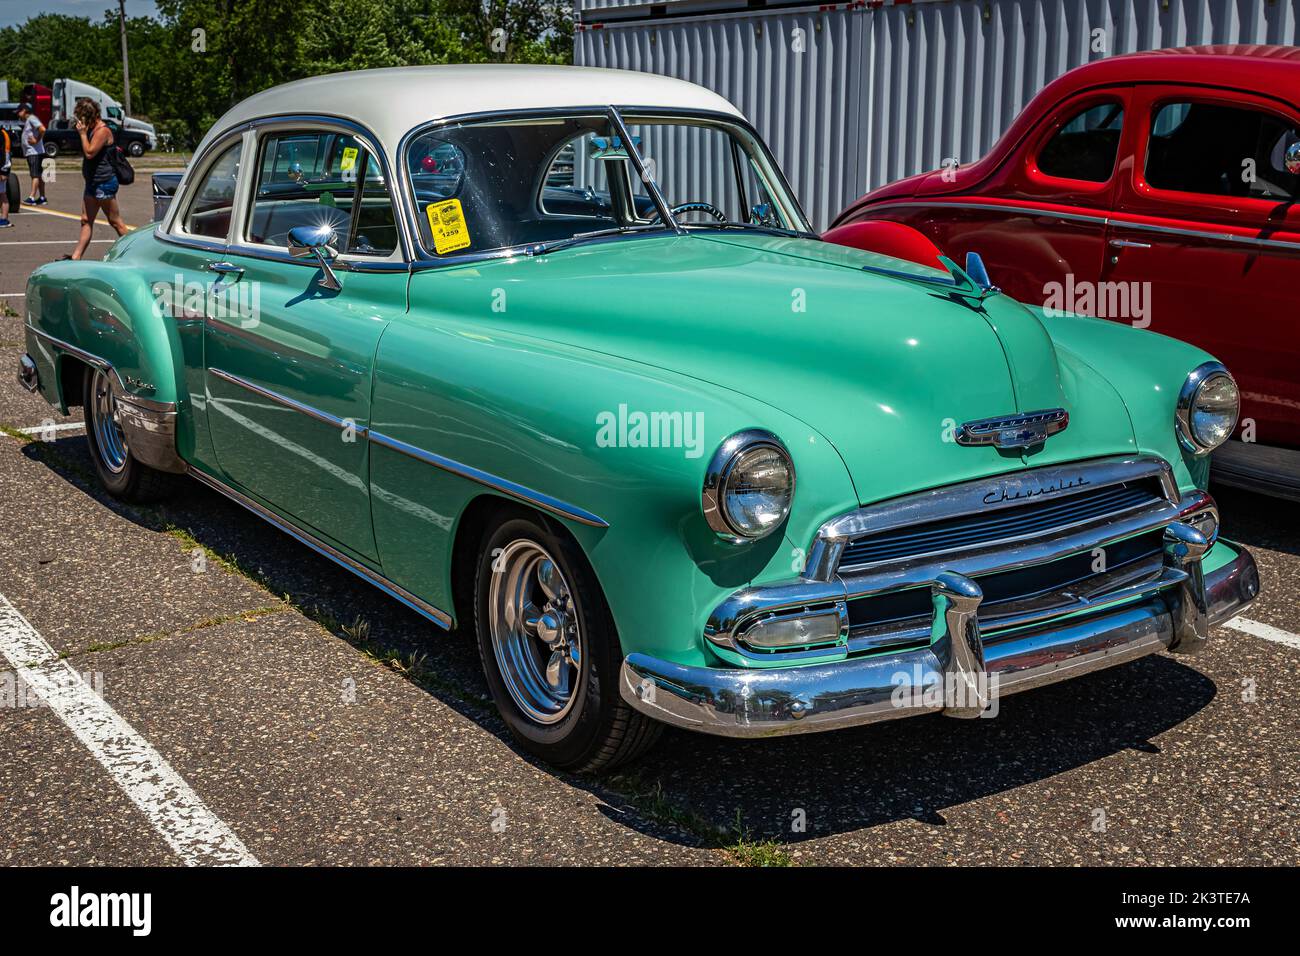 Falcon Heights, MN - June 18, 2022: High perspective front corner view of a 1952 Chevrolet Styleline Deluxe 2 Door Sedan at a local car show. Stock Photo